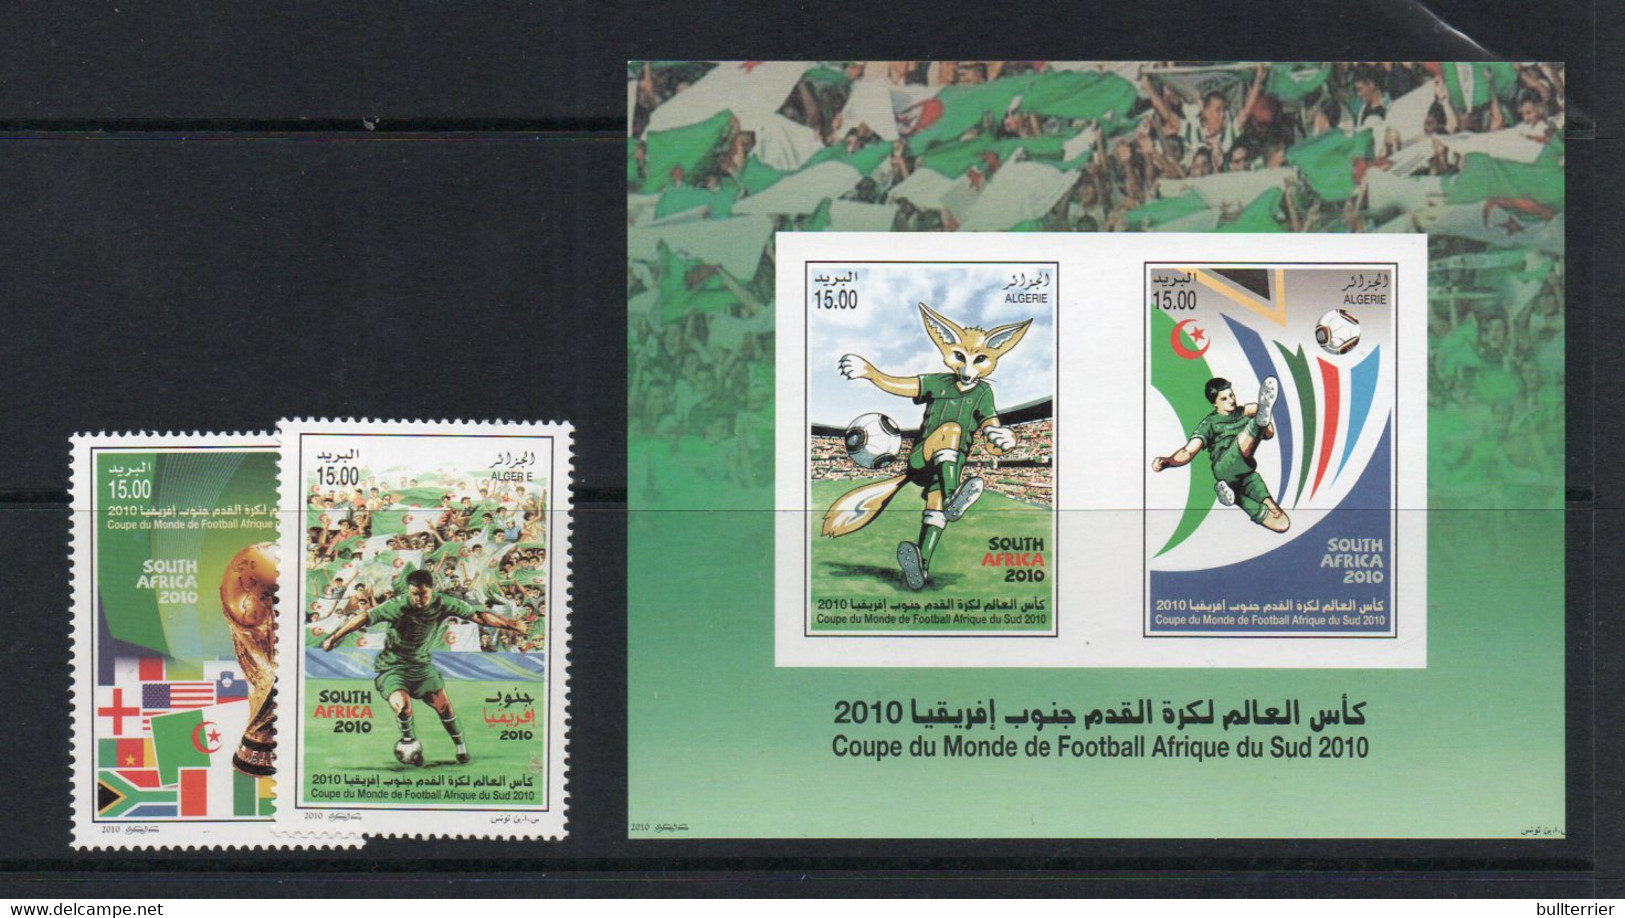 SOCCER   - ALGERIA - 2010 - WORLD CUP SOUTH AFRICA SET OF 2 + SOUVENIR SHEET  MINT NEVER HINGED - 2010 – South Africa